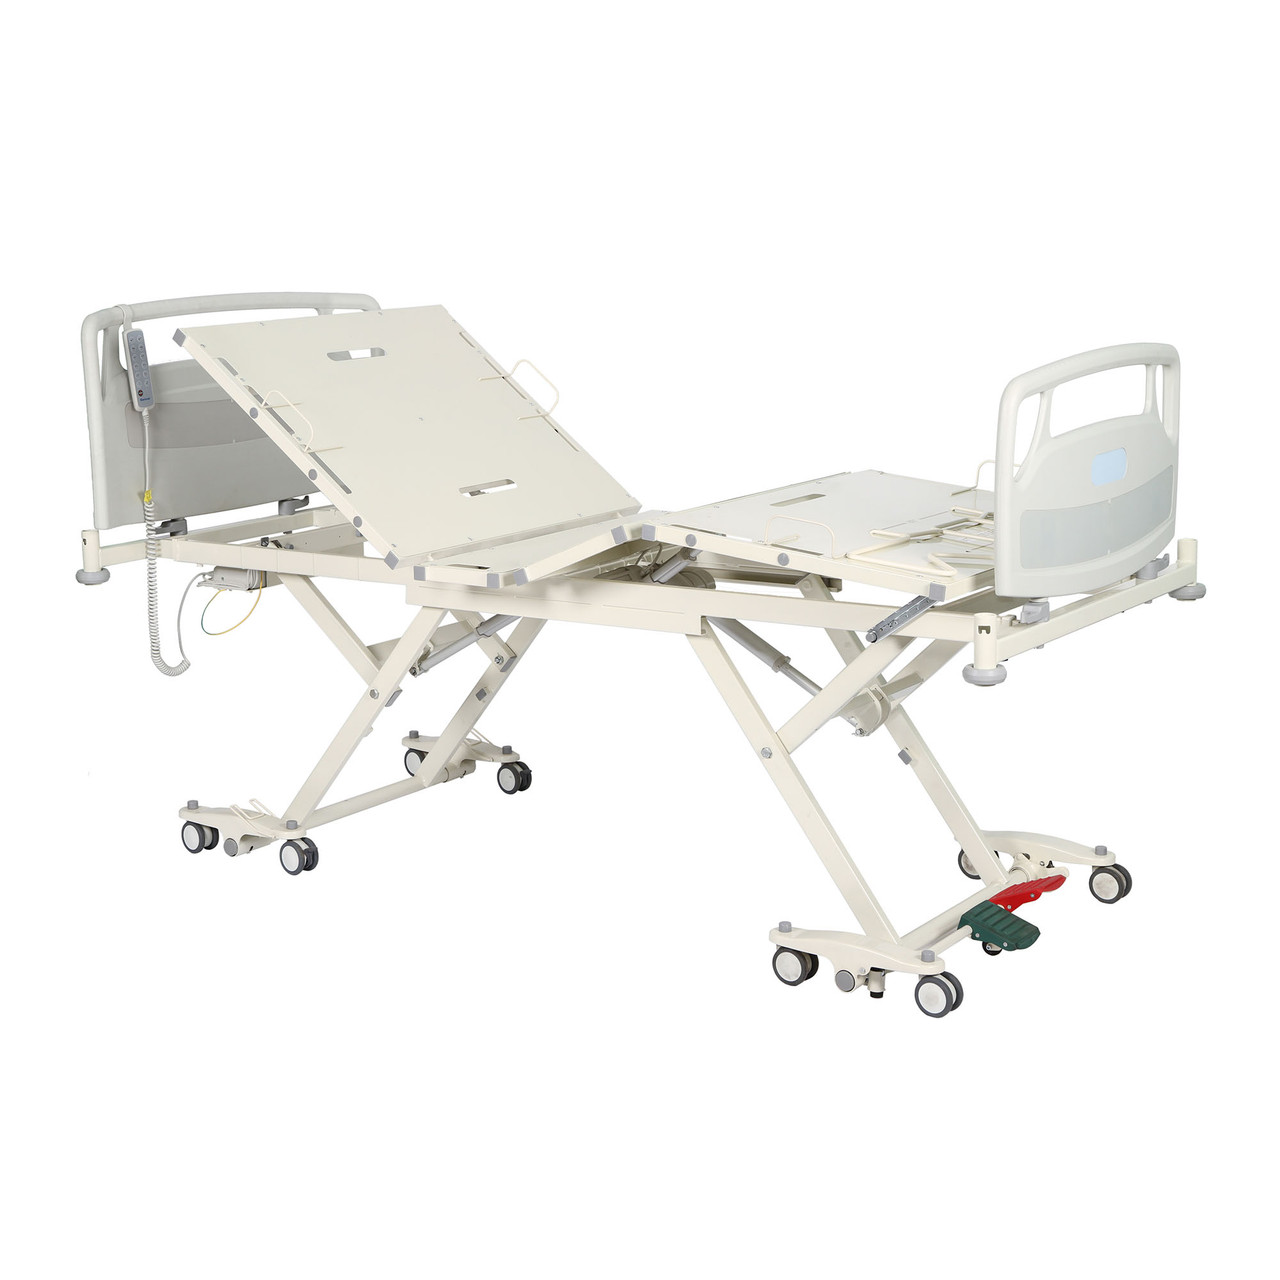 COSTCARE Acute LongTerm Low Bed With Head  Foot Boards Composite